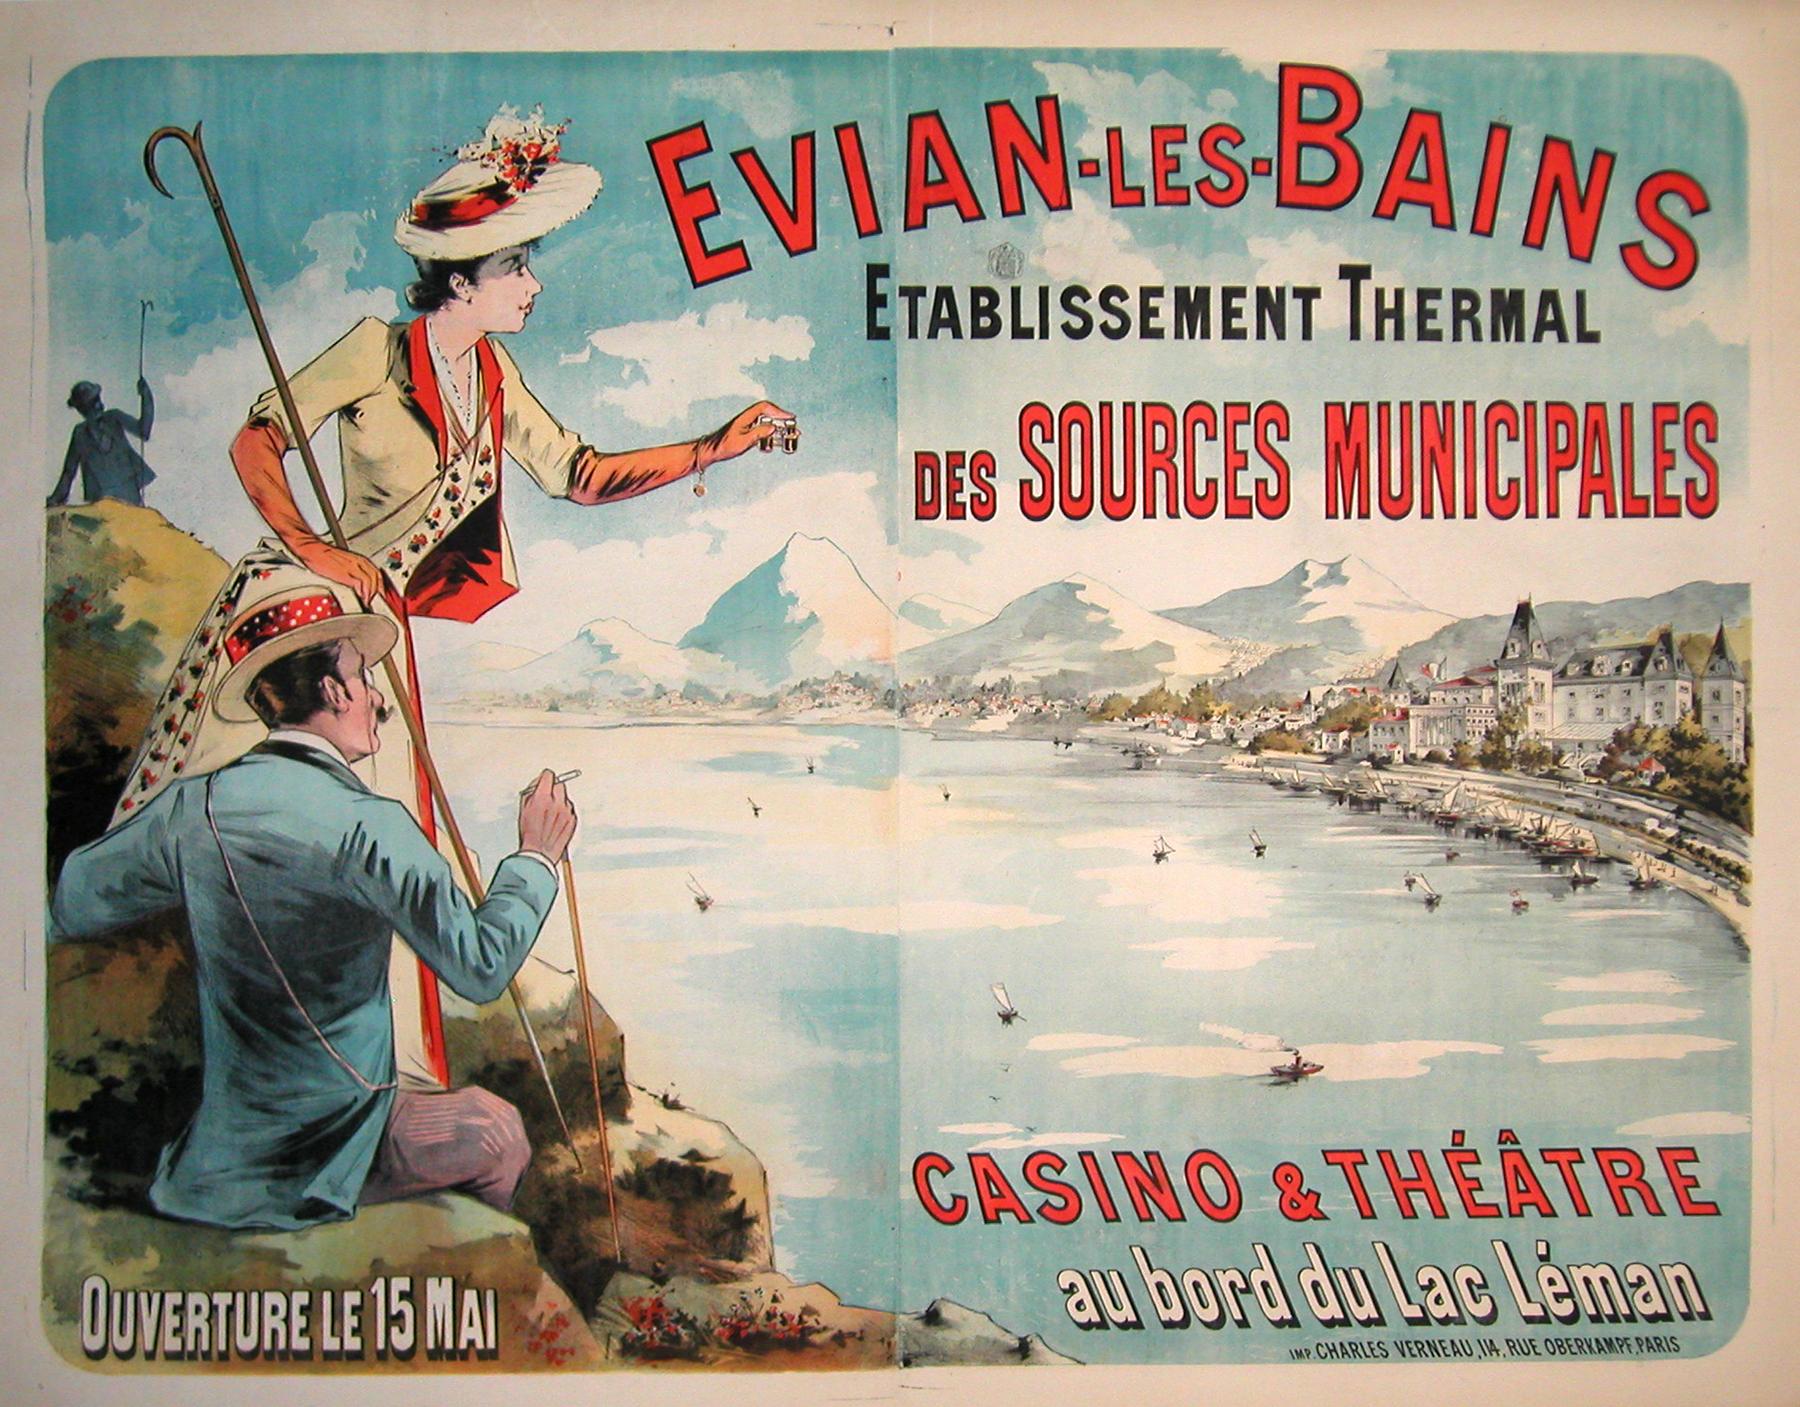 This delightful image iencourages the viewer to visit the lakeside community of Evian les Bains. In addition to it being the source of Evian Water, it was a destination for fine mineral baths. It offered the visitor hotels, theater, and a casino.